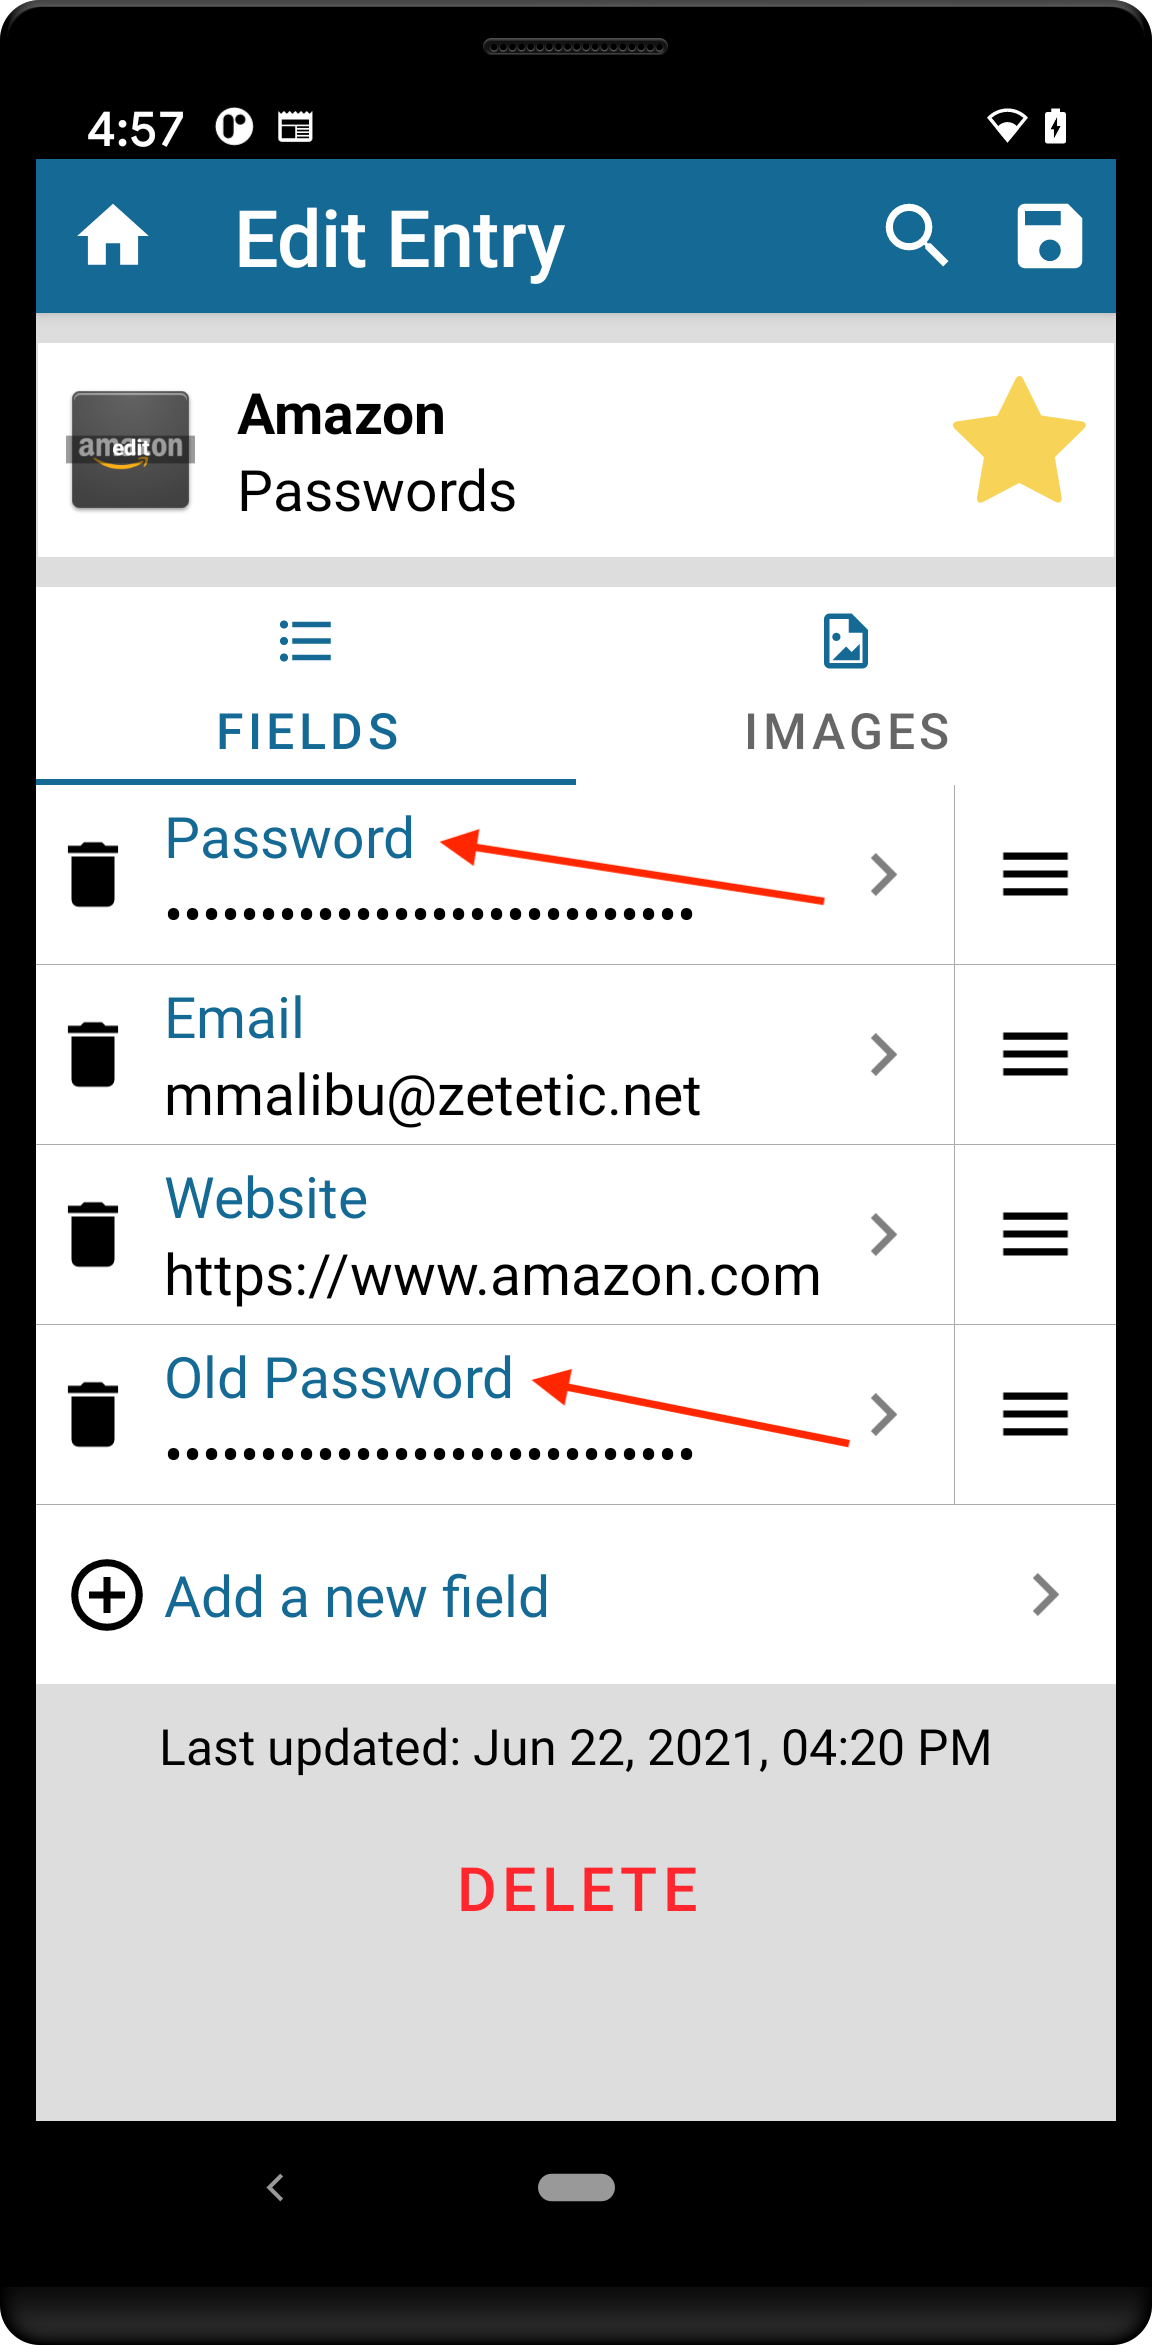 Amazon entry showing Password and Old Password fields